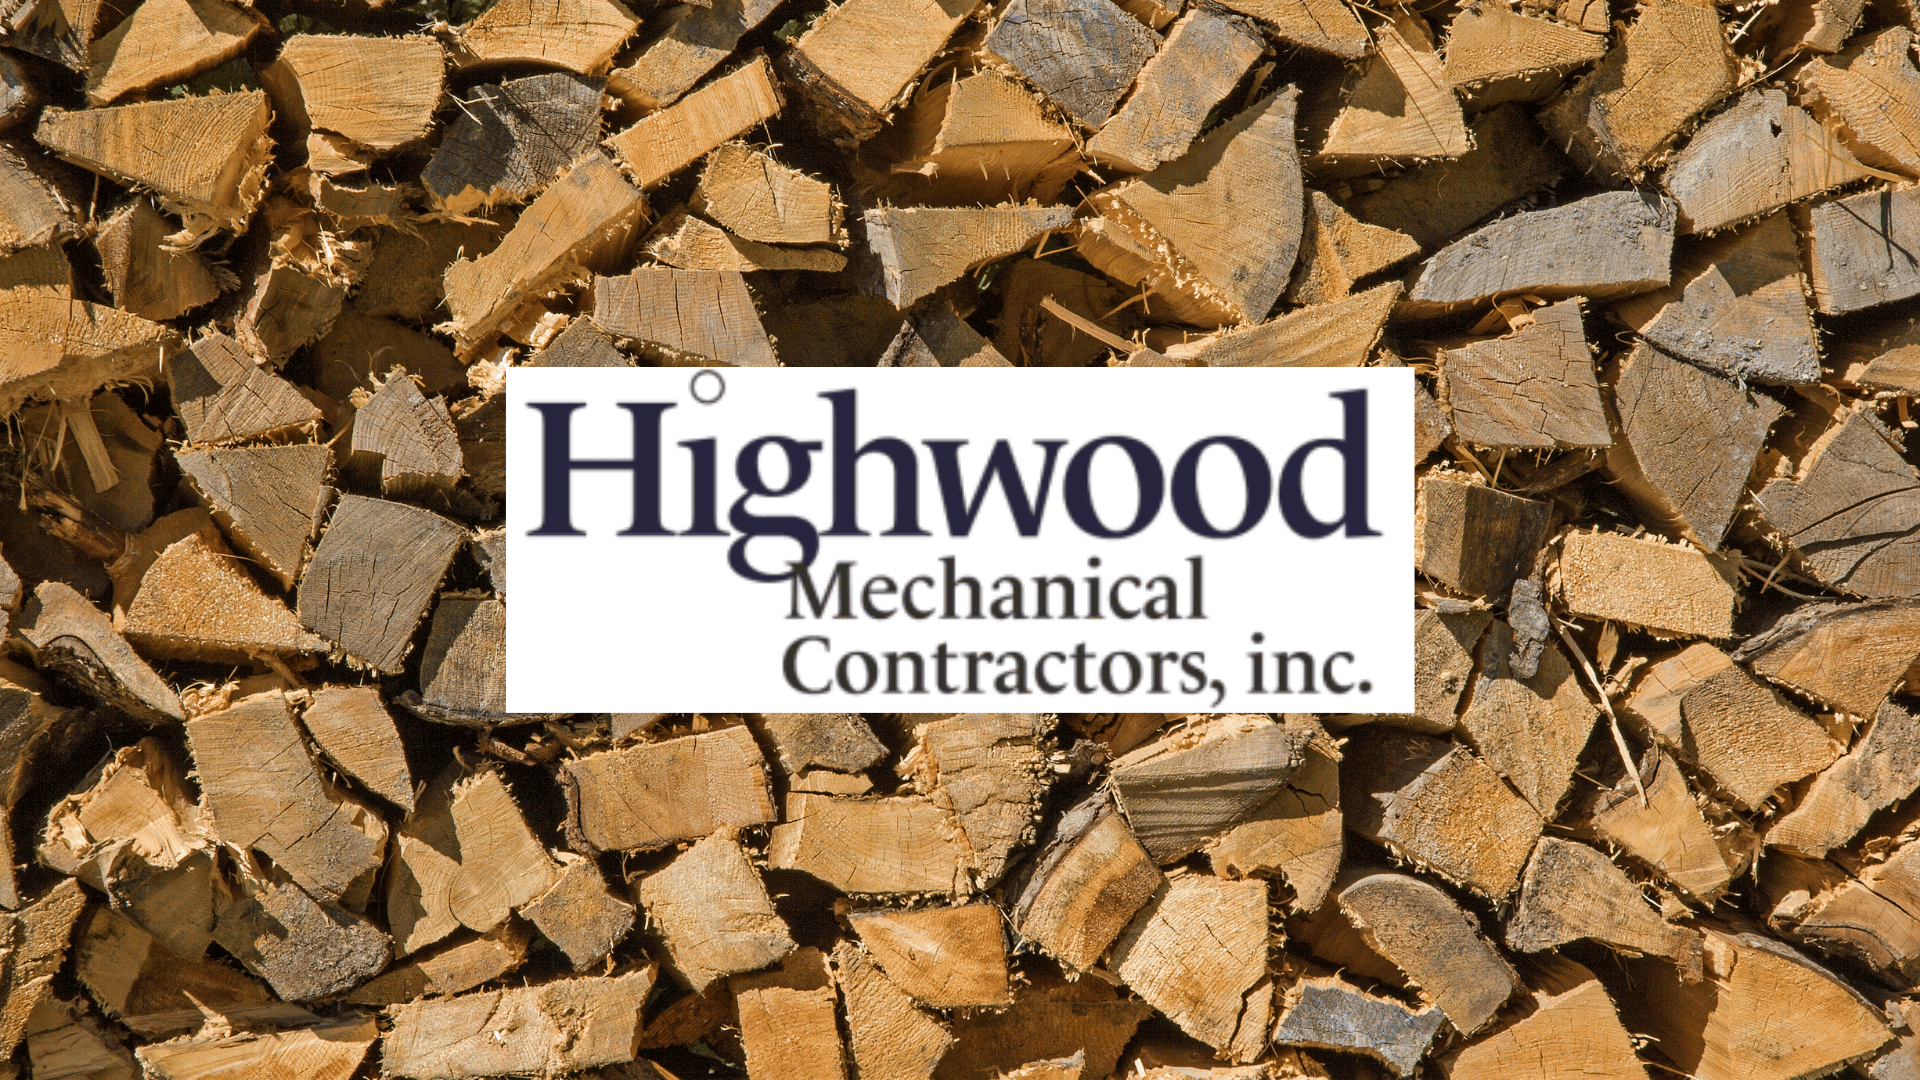 Highwood Logo with Wood as a Second Source of Heat